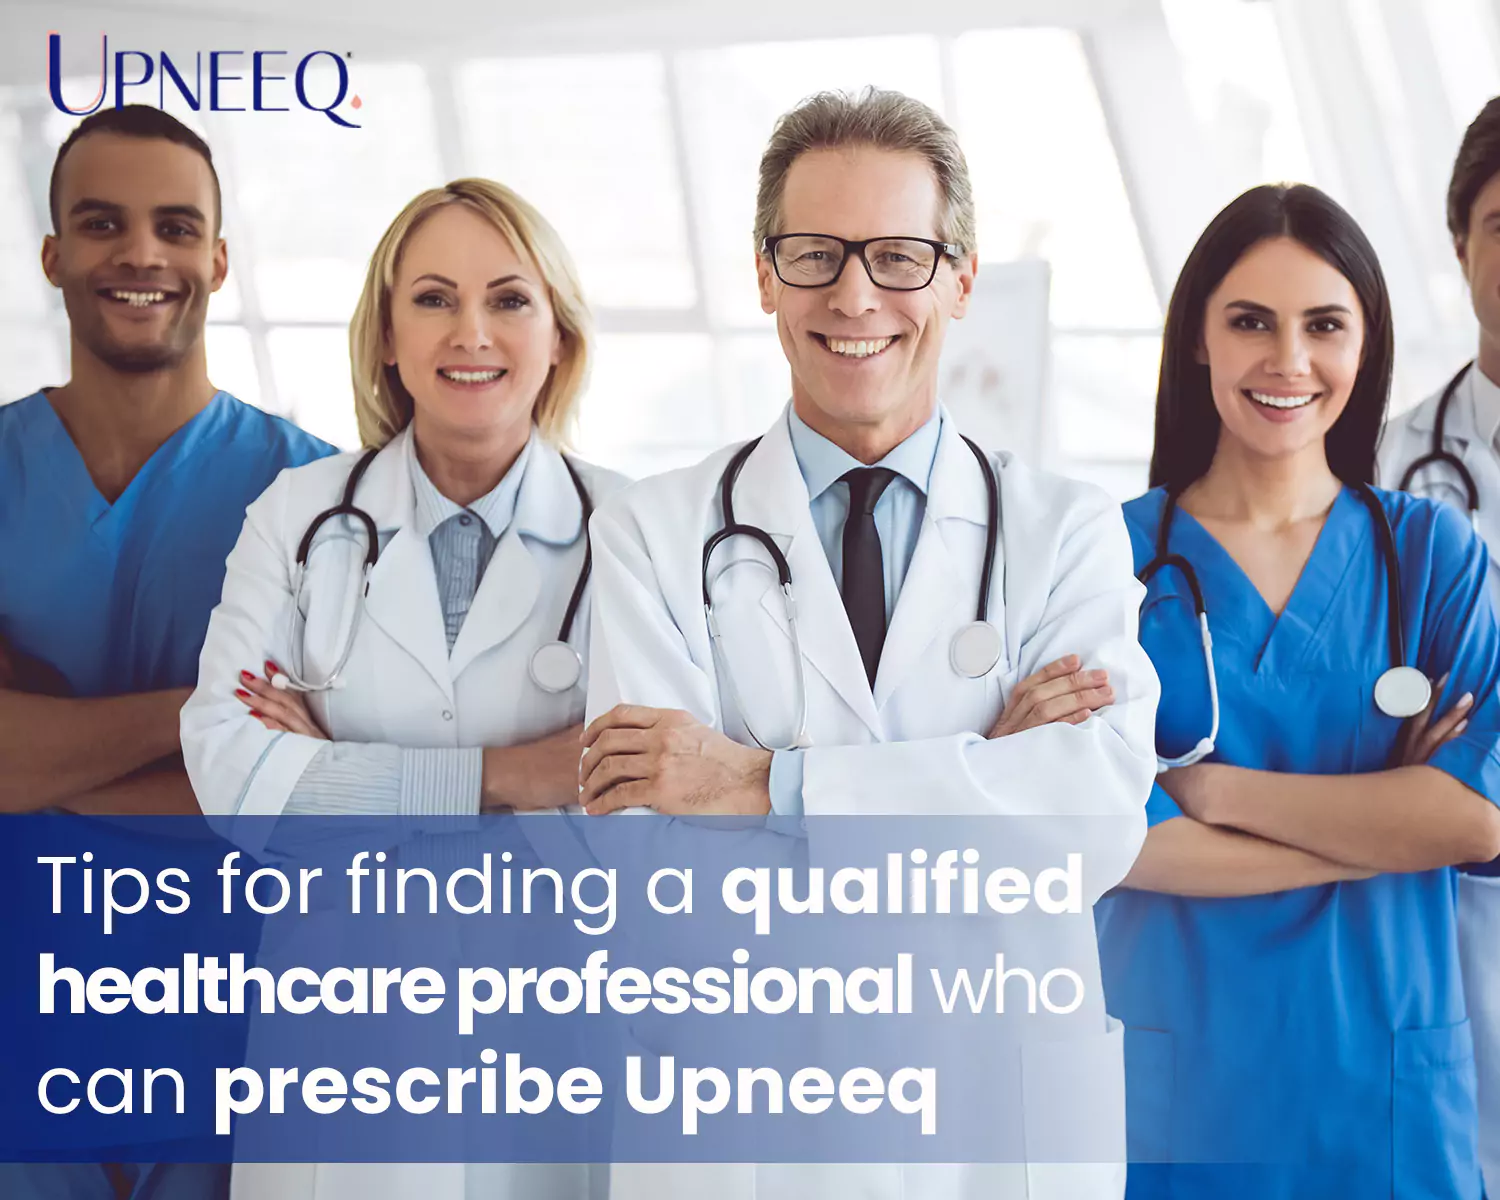 Tips for finding a qualified healthcare professional who can prescribe Upneeq